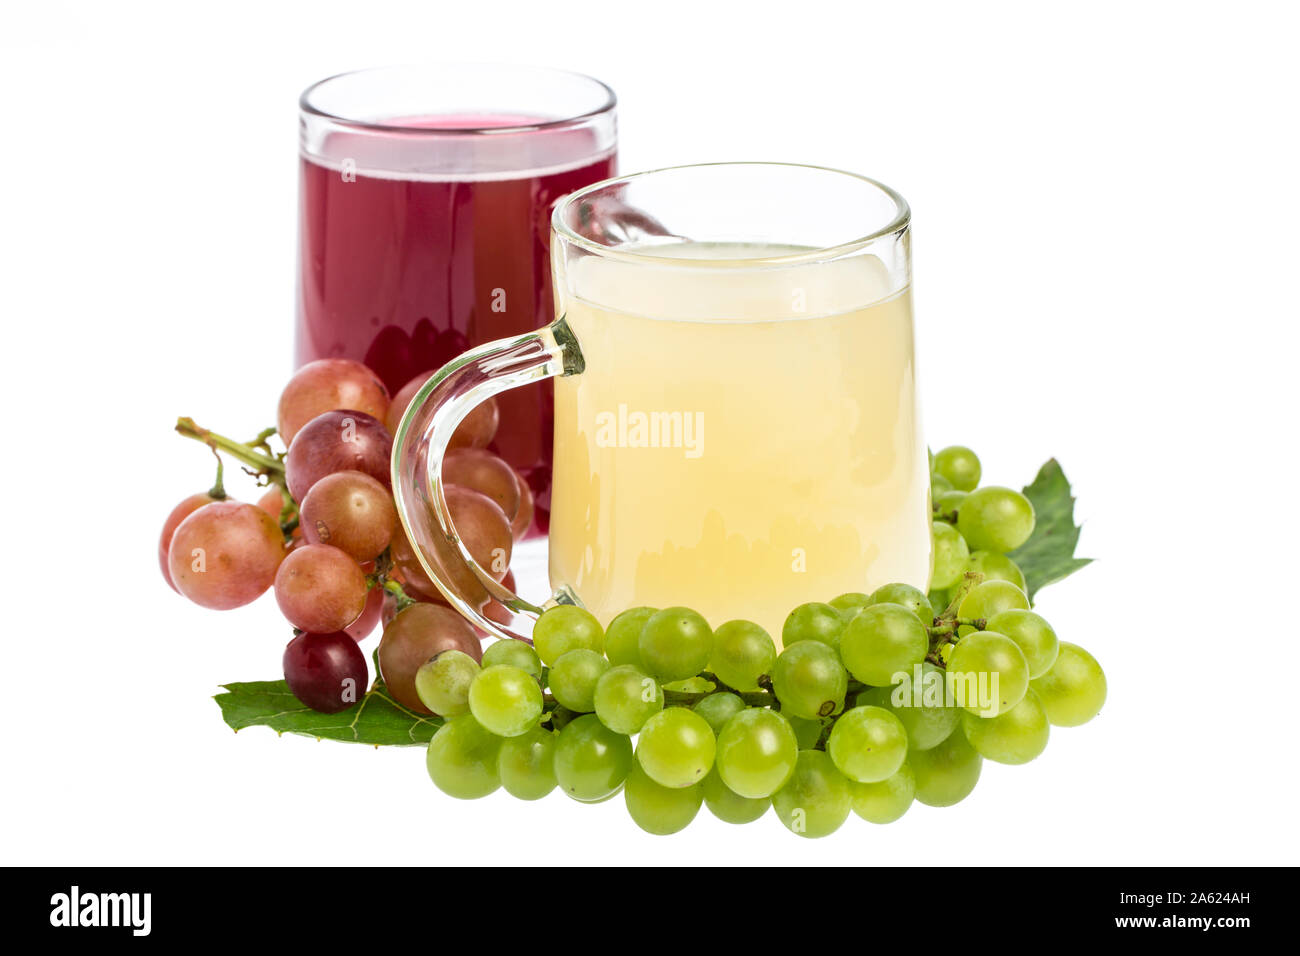 'Sturm': Red and white wine decorated with grapes Stock Photo